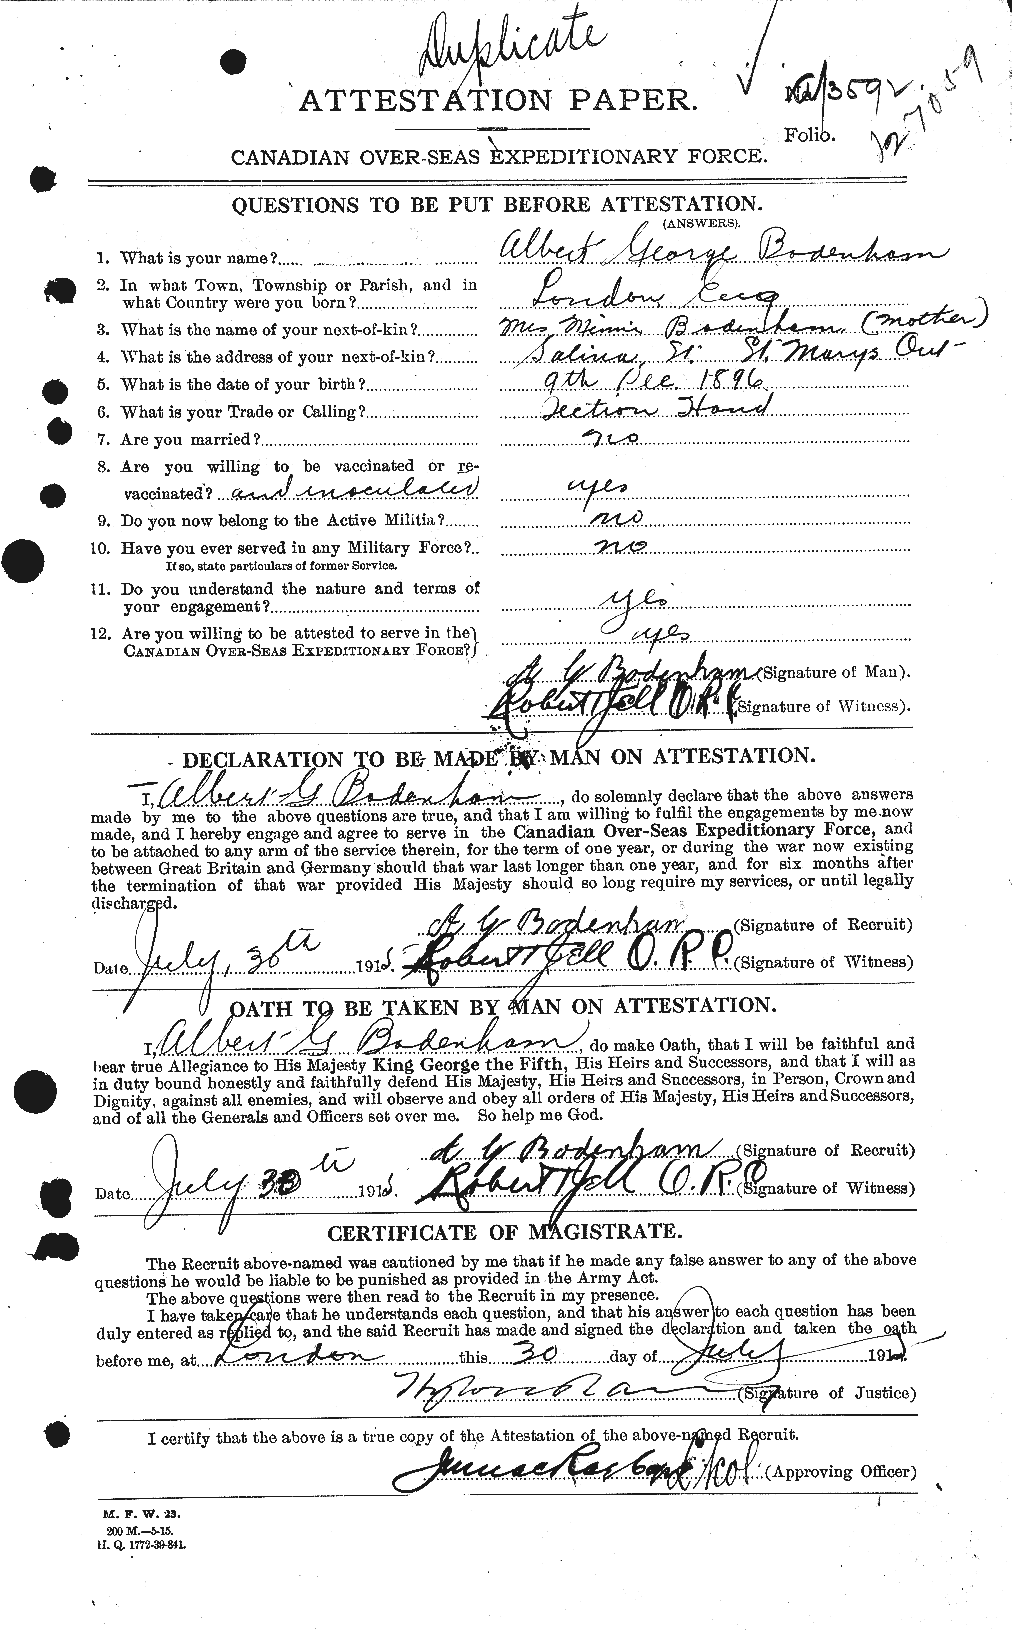 Personnel Records of the First World War - CEF 245190a